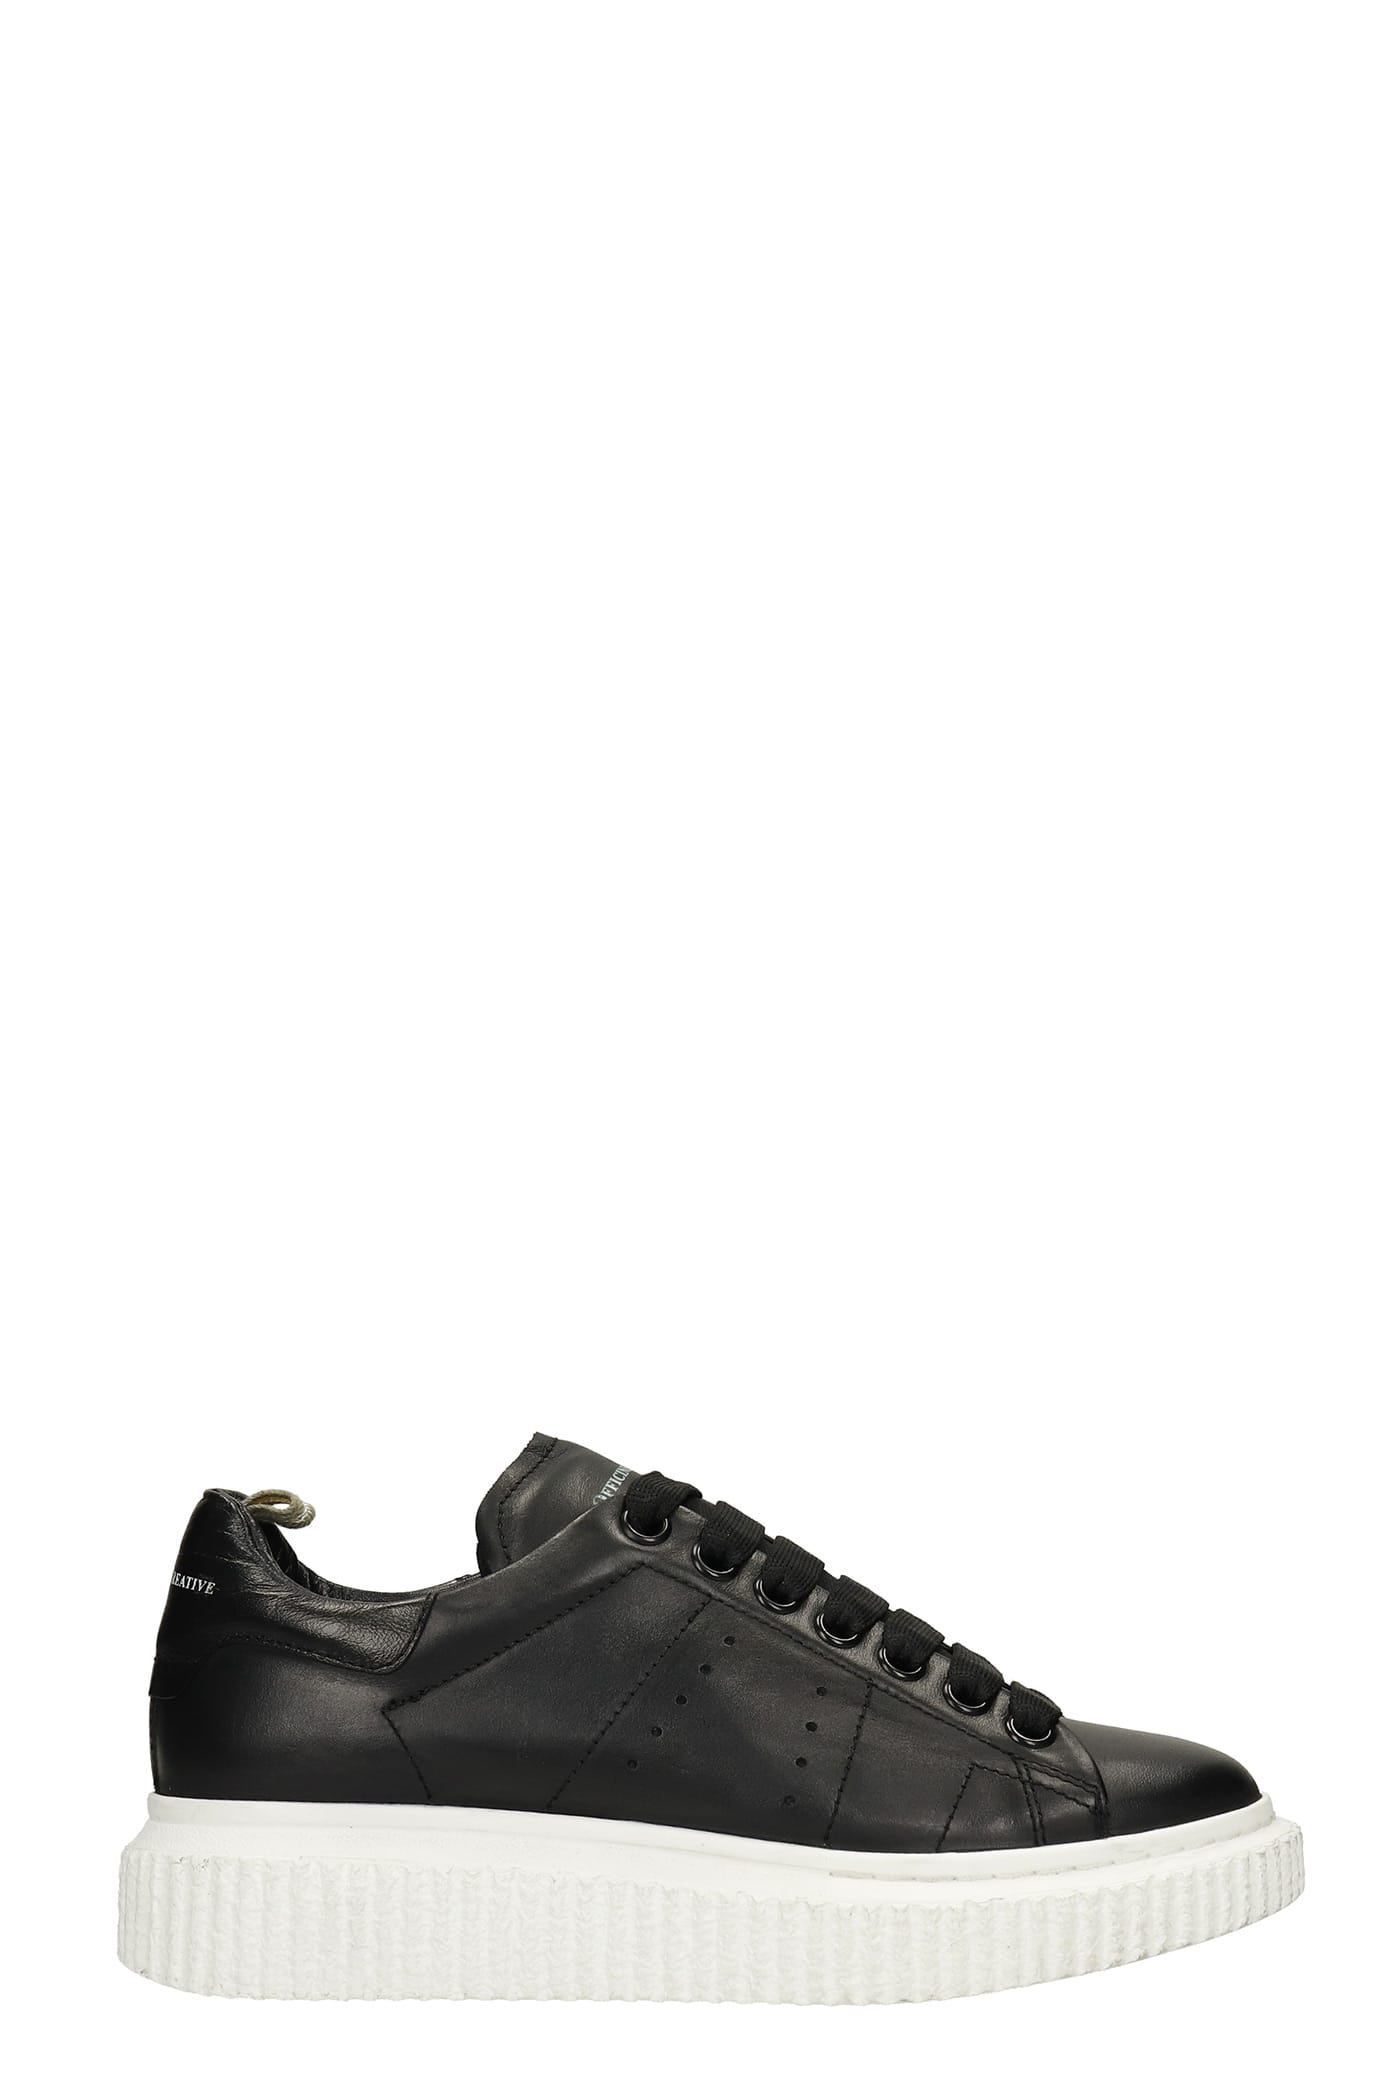 Officine Creative Krace 118 Sneakers In Black Leather